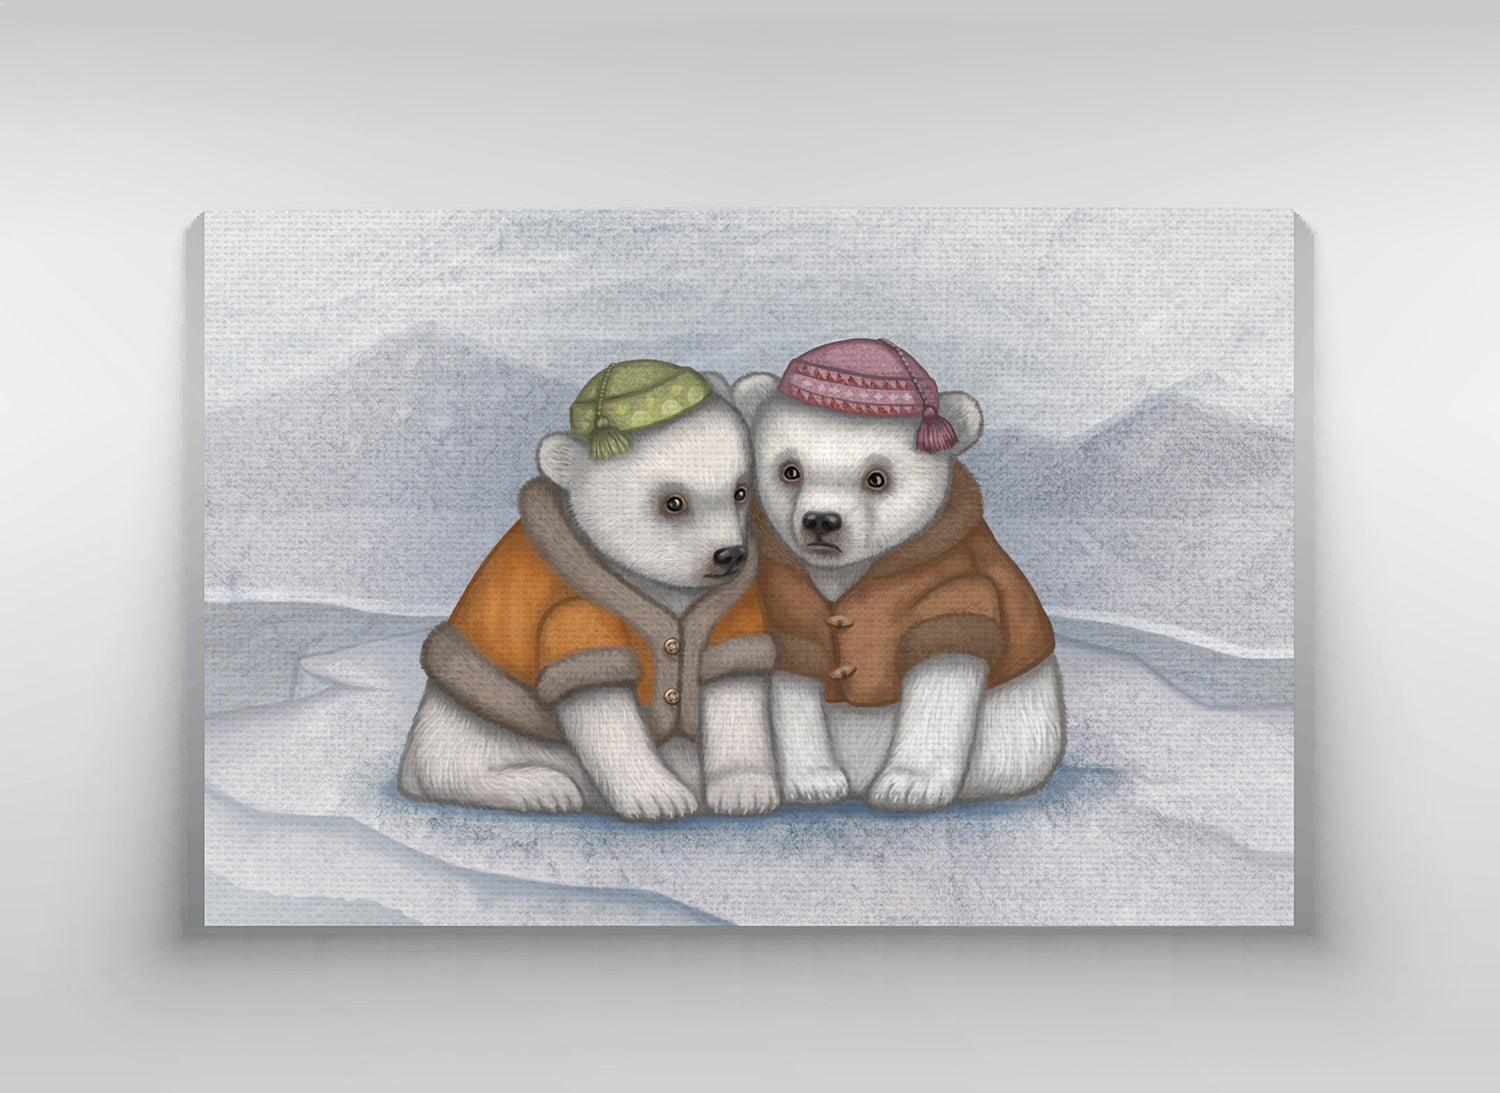 Canvas "You don't really know your friends until the ice breaks" (Polar bears)